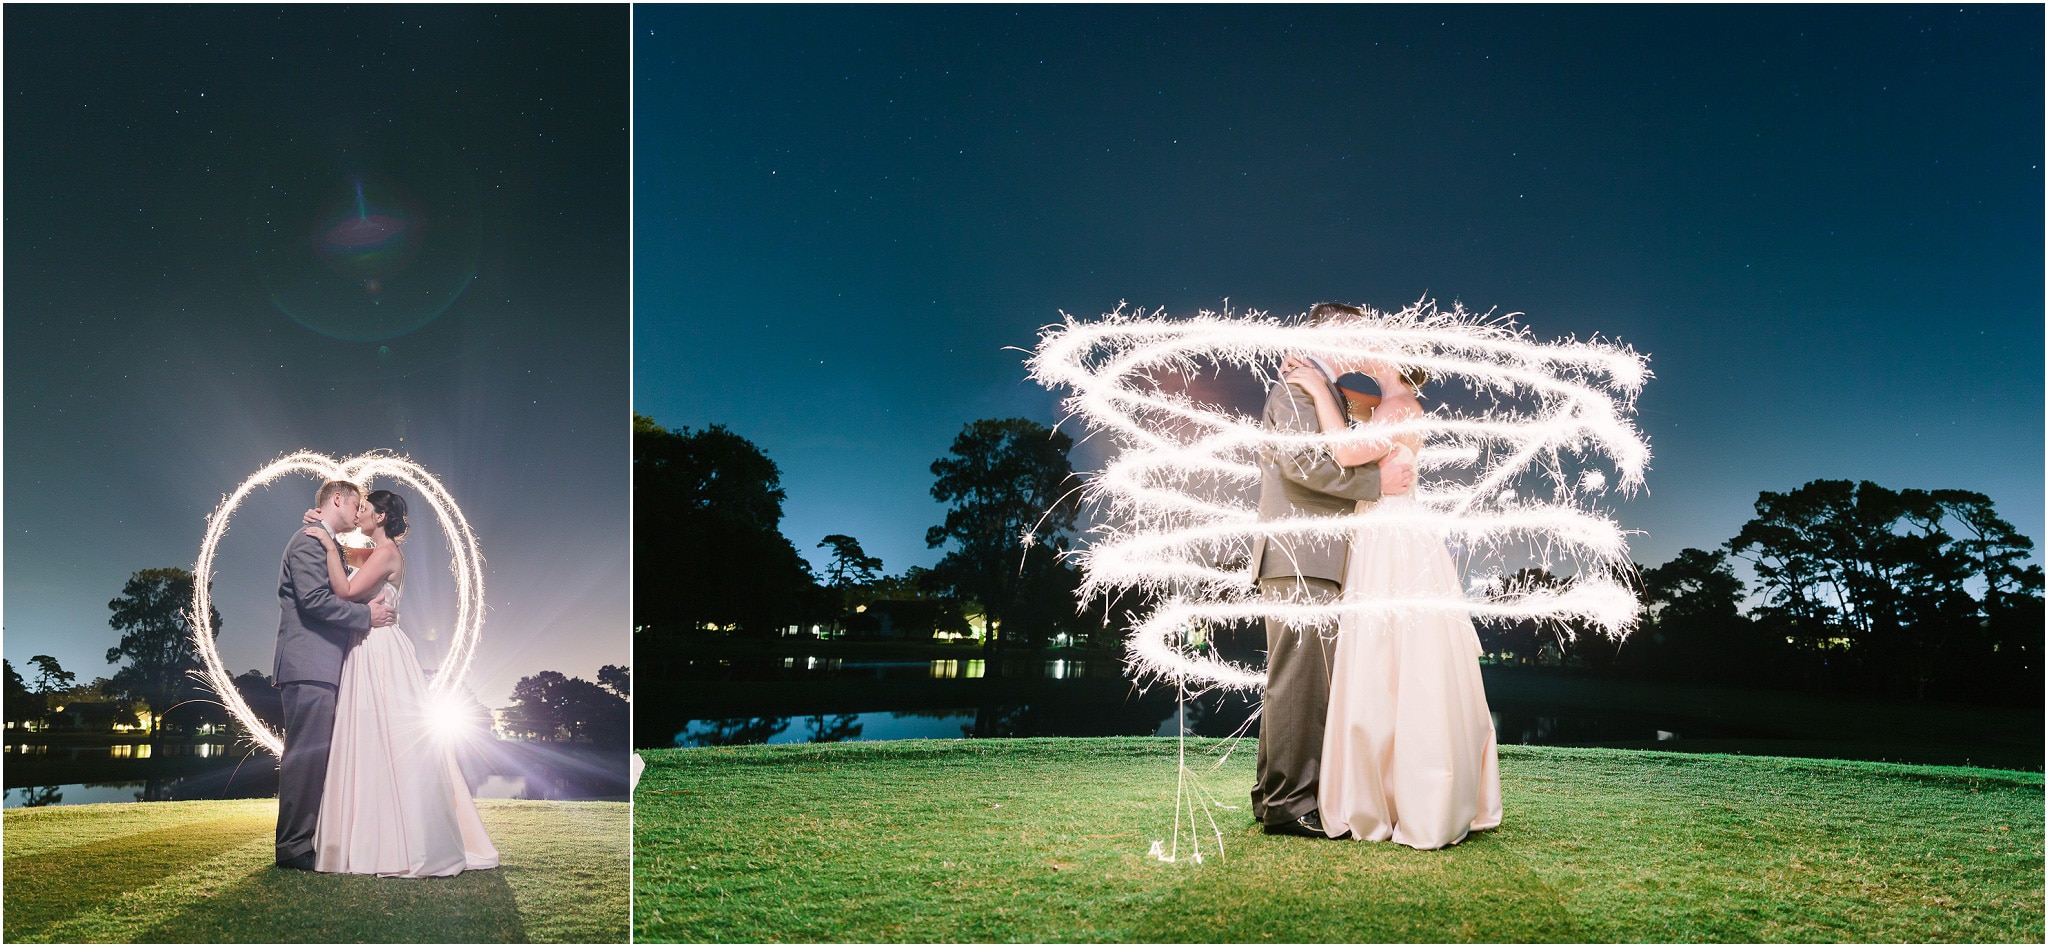 Sparkler photography on a wedding day, the tracers turned out beautifully